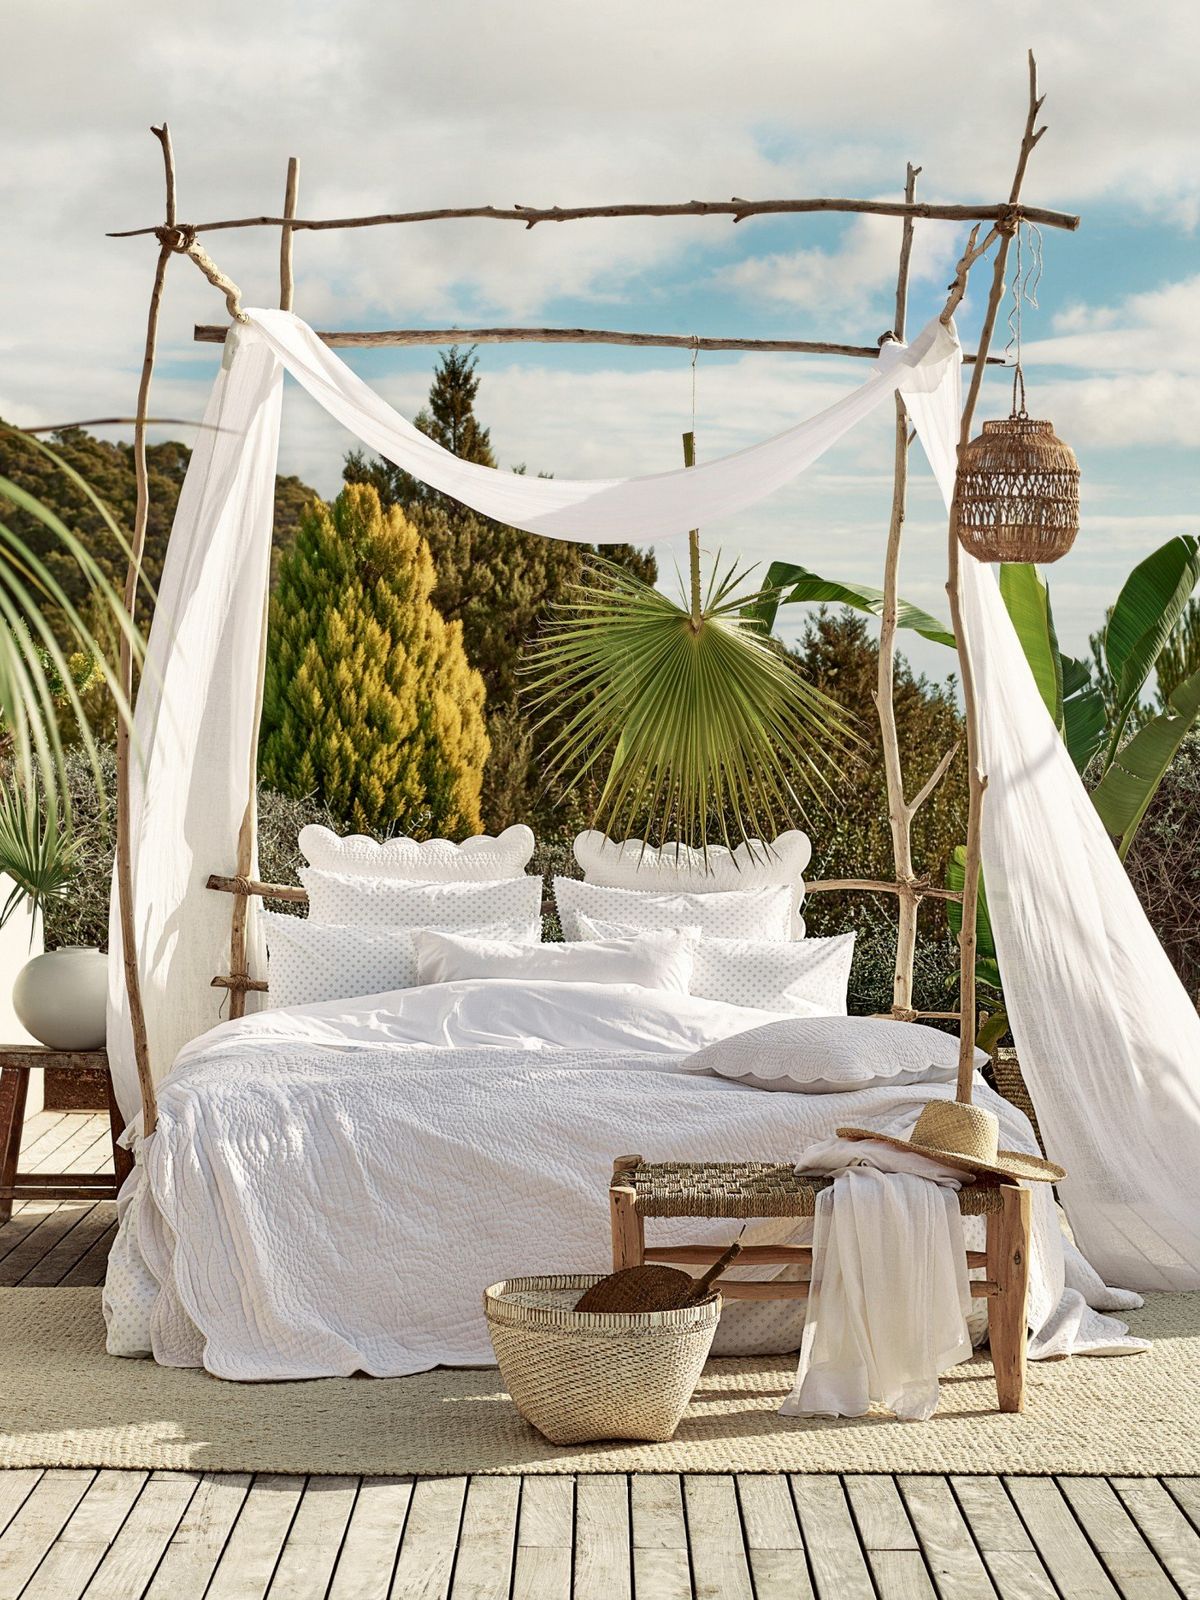 a bed with white sheets and a canopy on a wooden deck